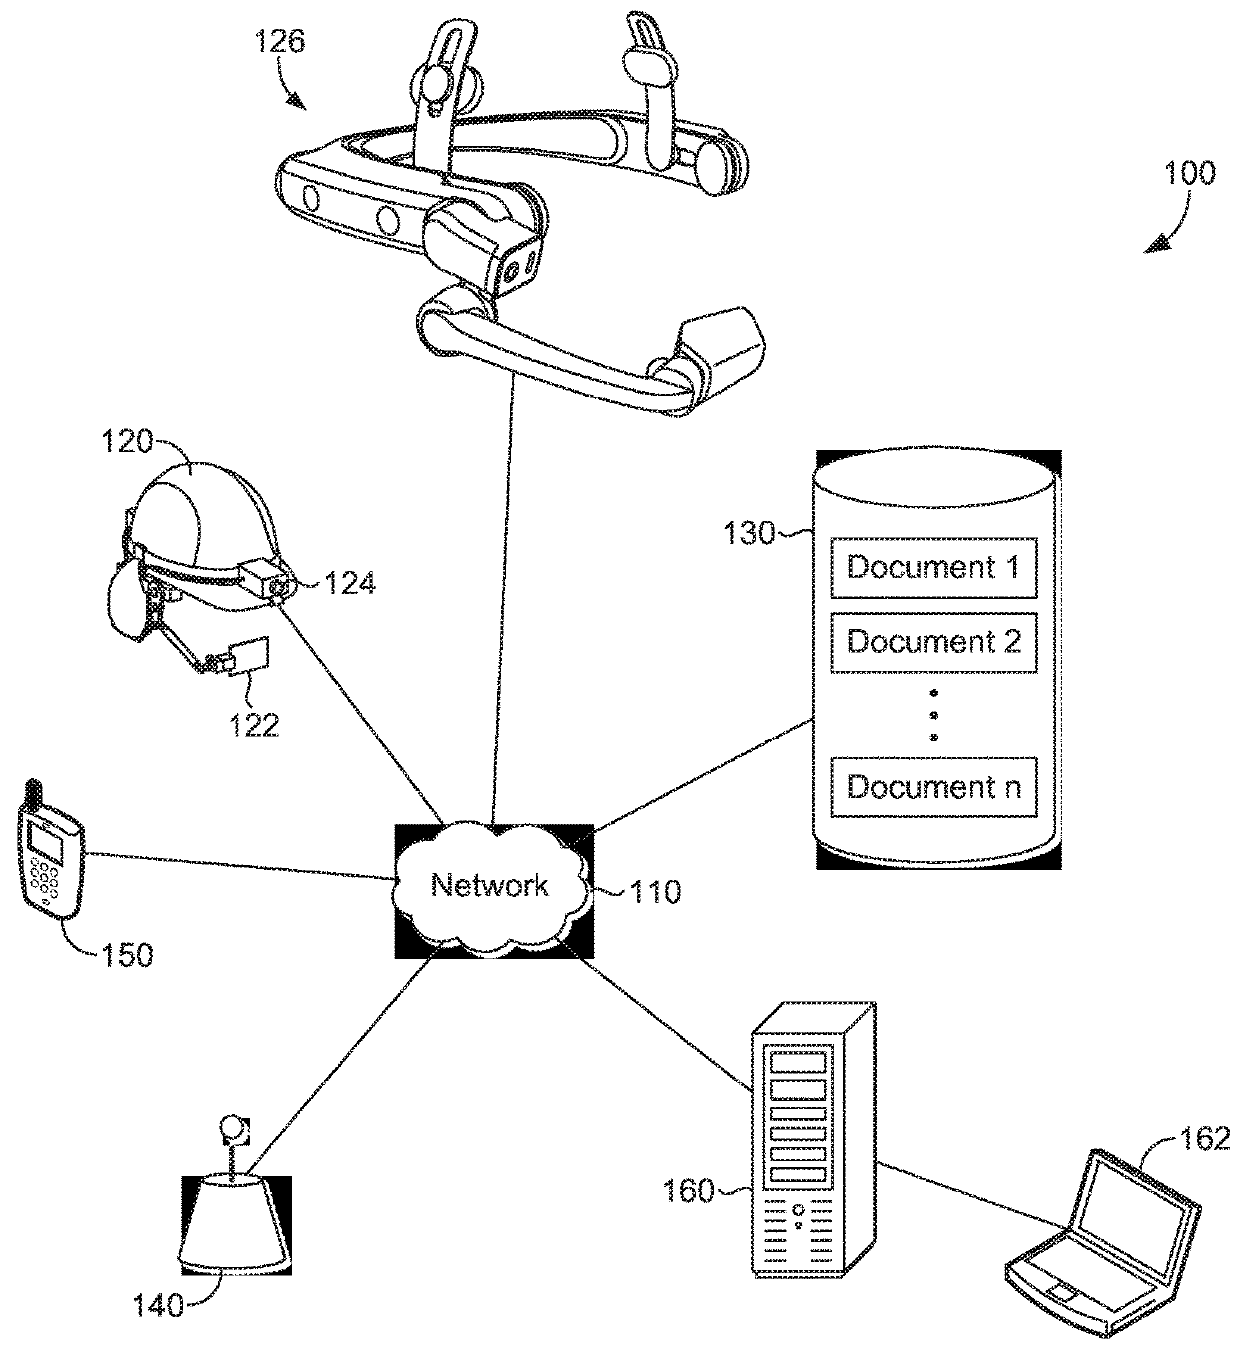 Hands-free contextually aware object interaction for wearable display